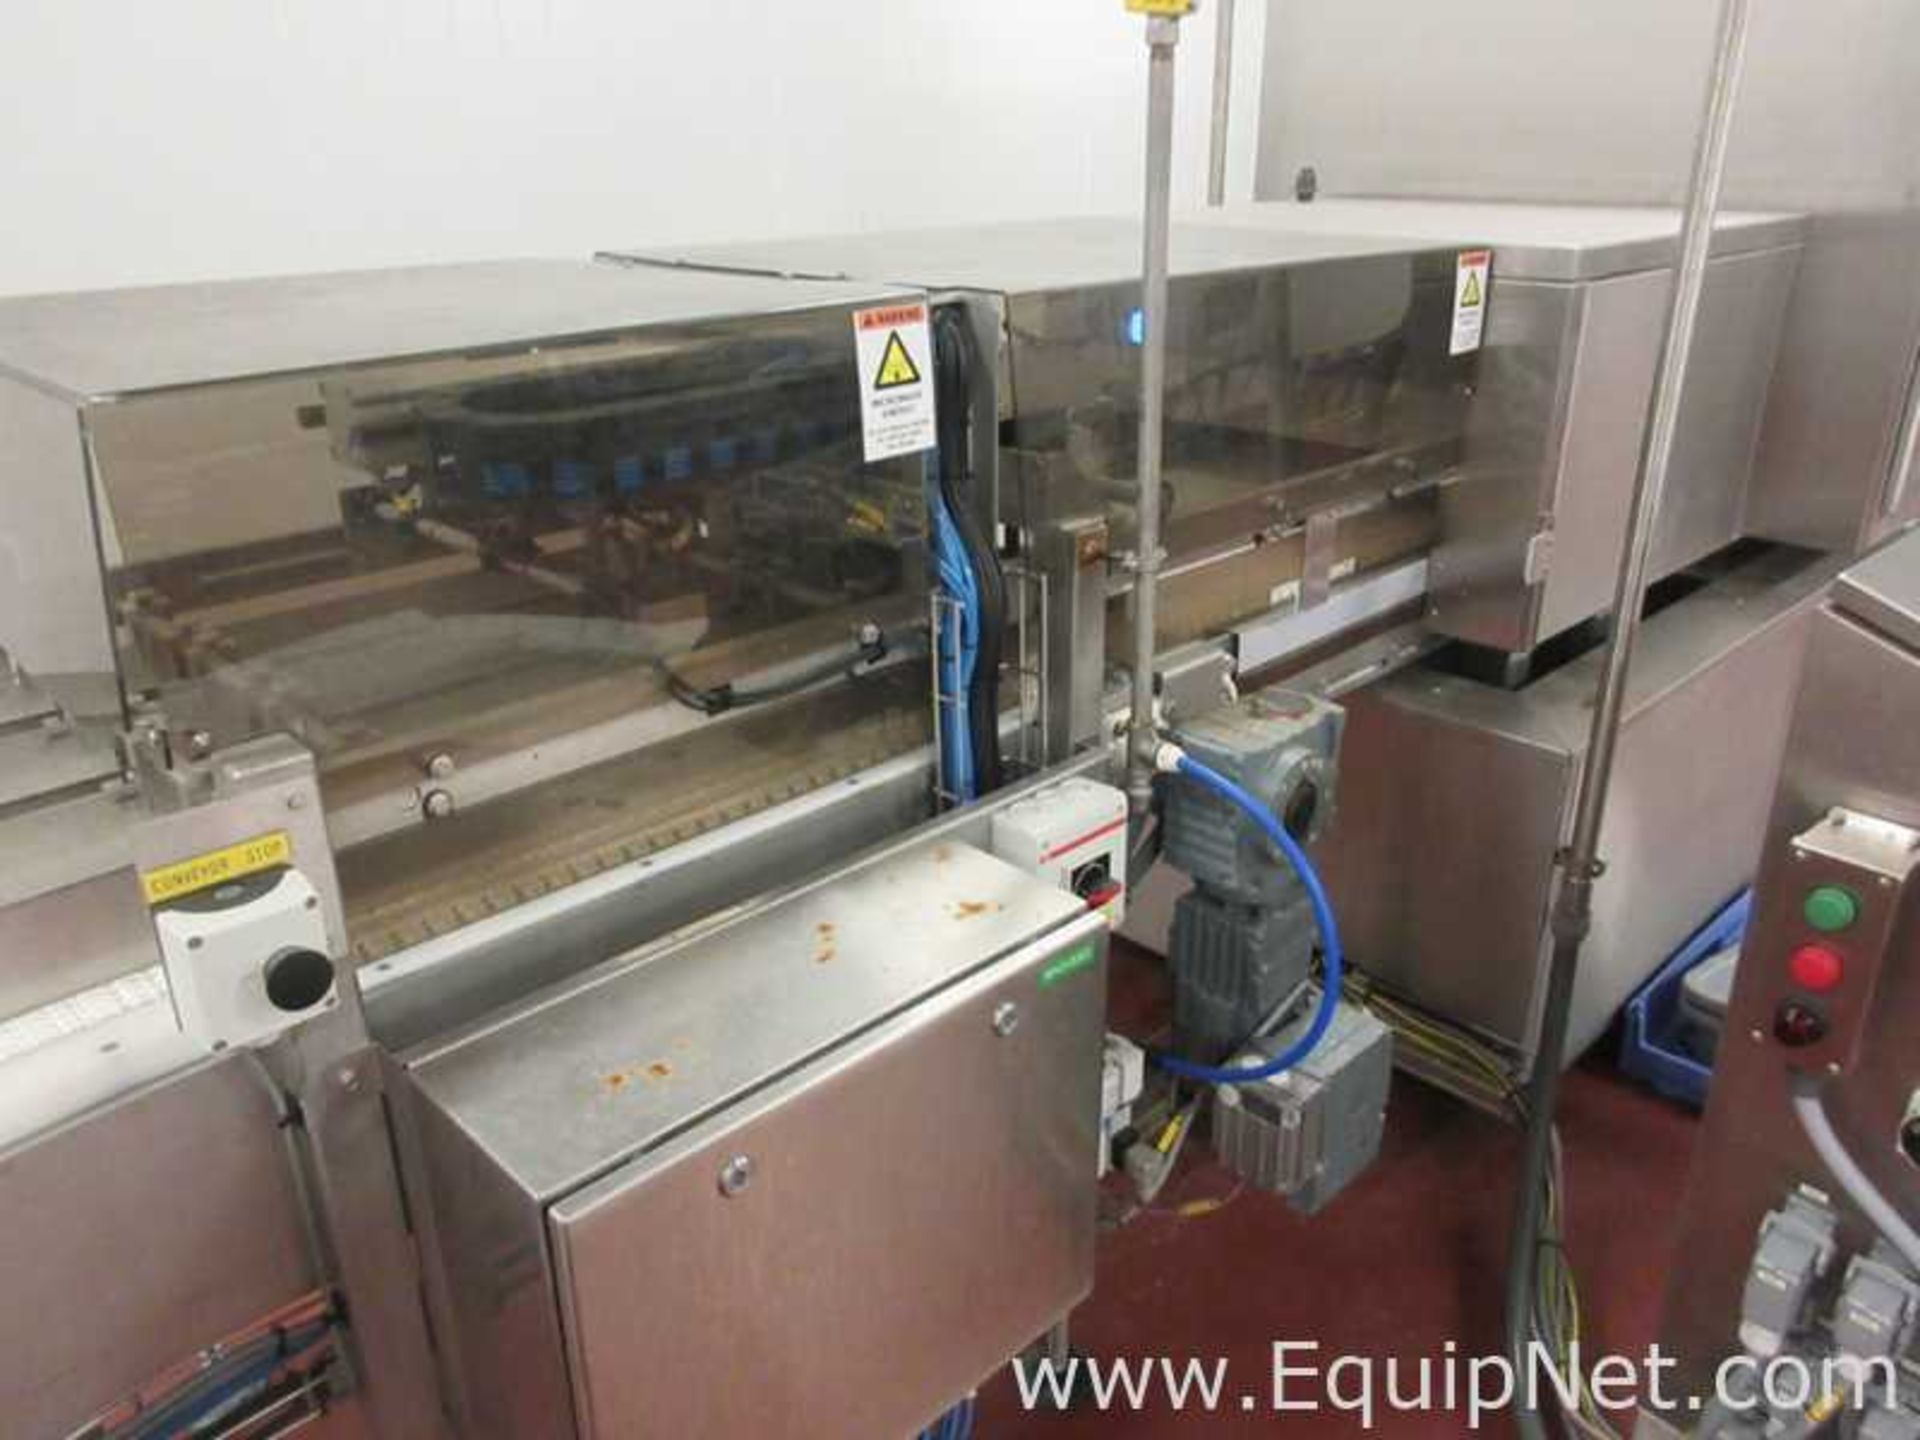 EQUIPNET LISTING #775984; REMOVAL COST: $6,510.00; MODEL: MMM; DESCRIPTION: Tivox Uvox Microwave - Image 8 of 18